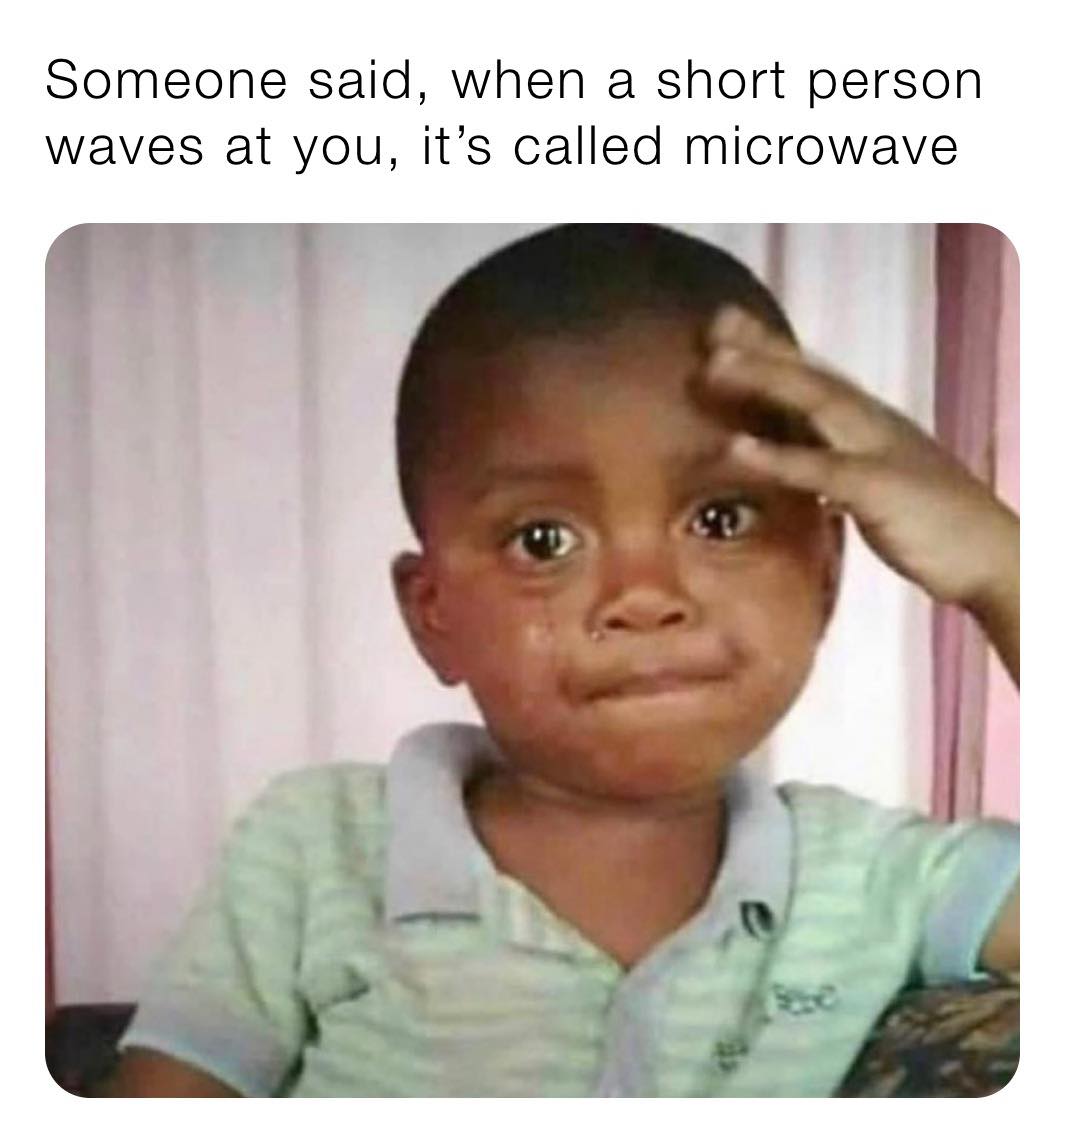 extremely funny memes - Someone said, when a short person waves at you, it's called microwave